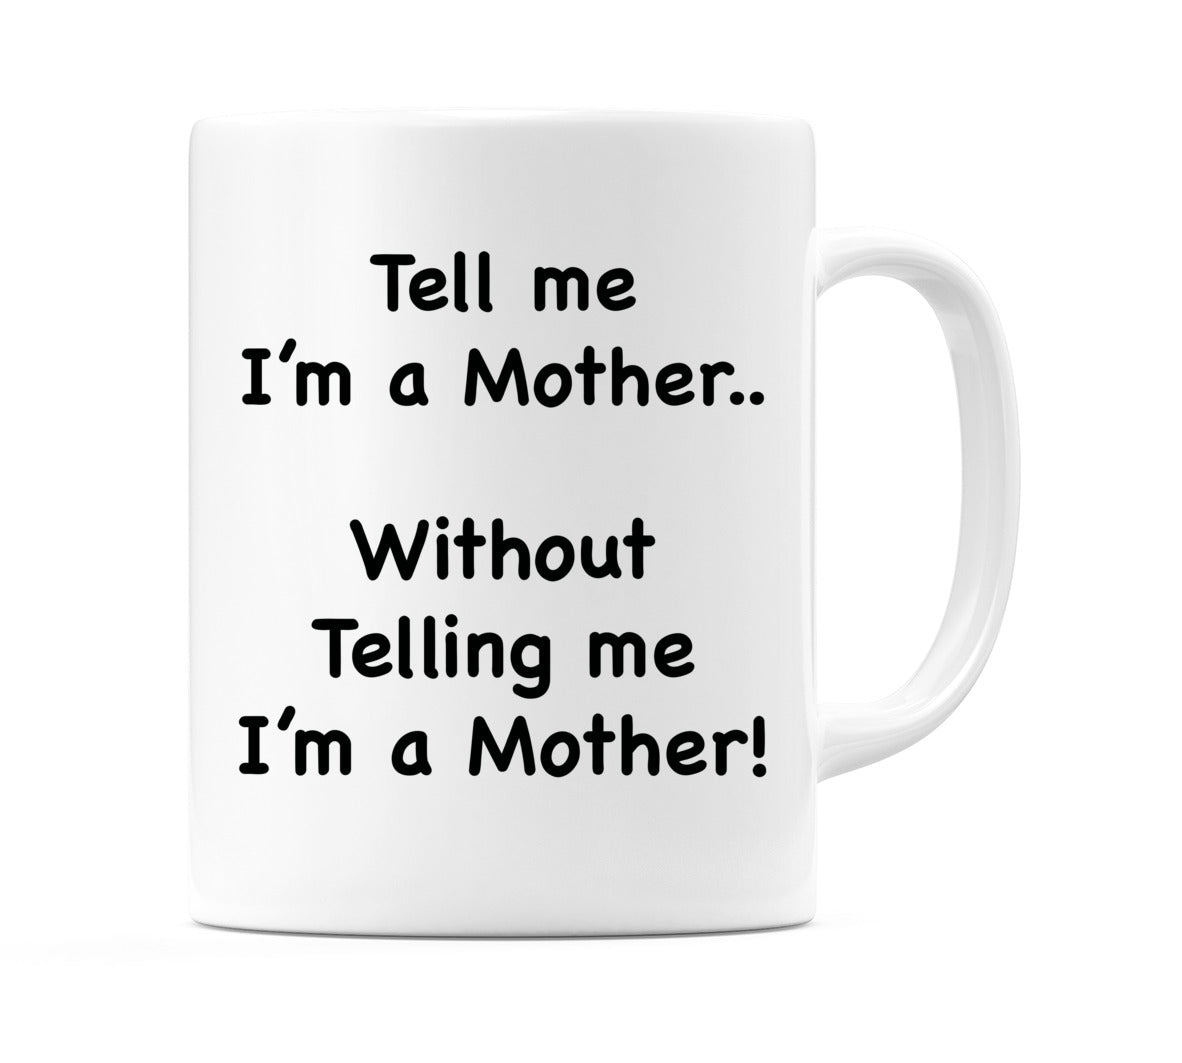 Tell me I'm a Mother.. Without Telling me I'm a Mother! Mug